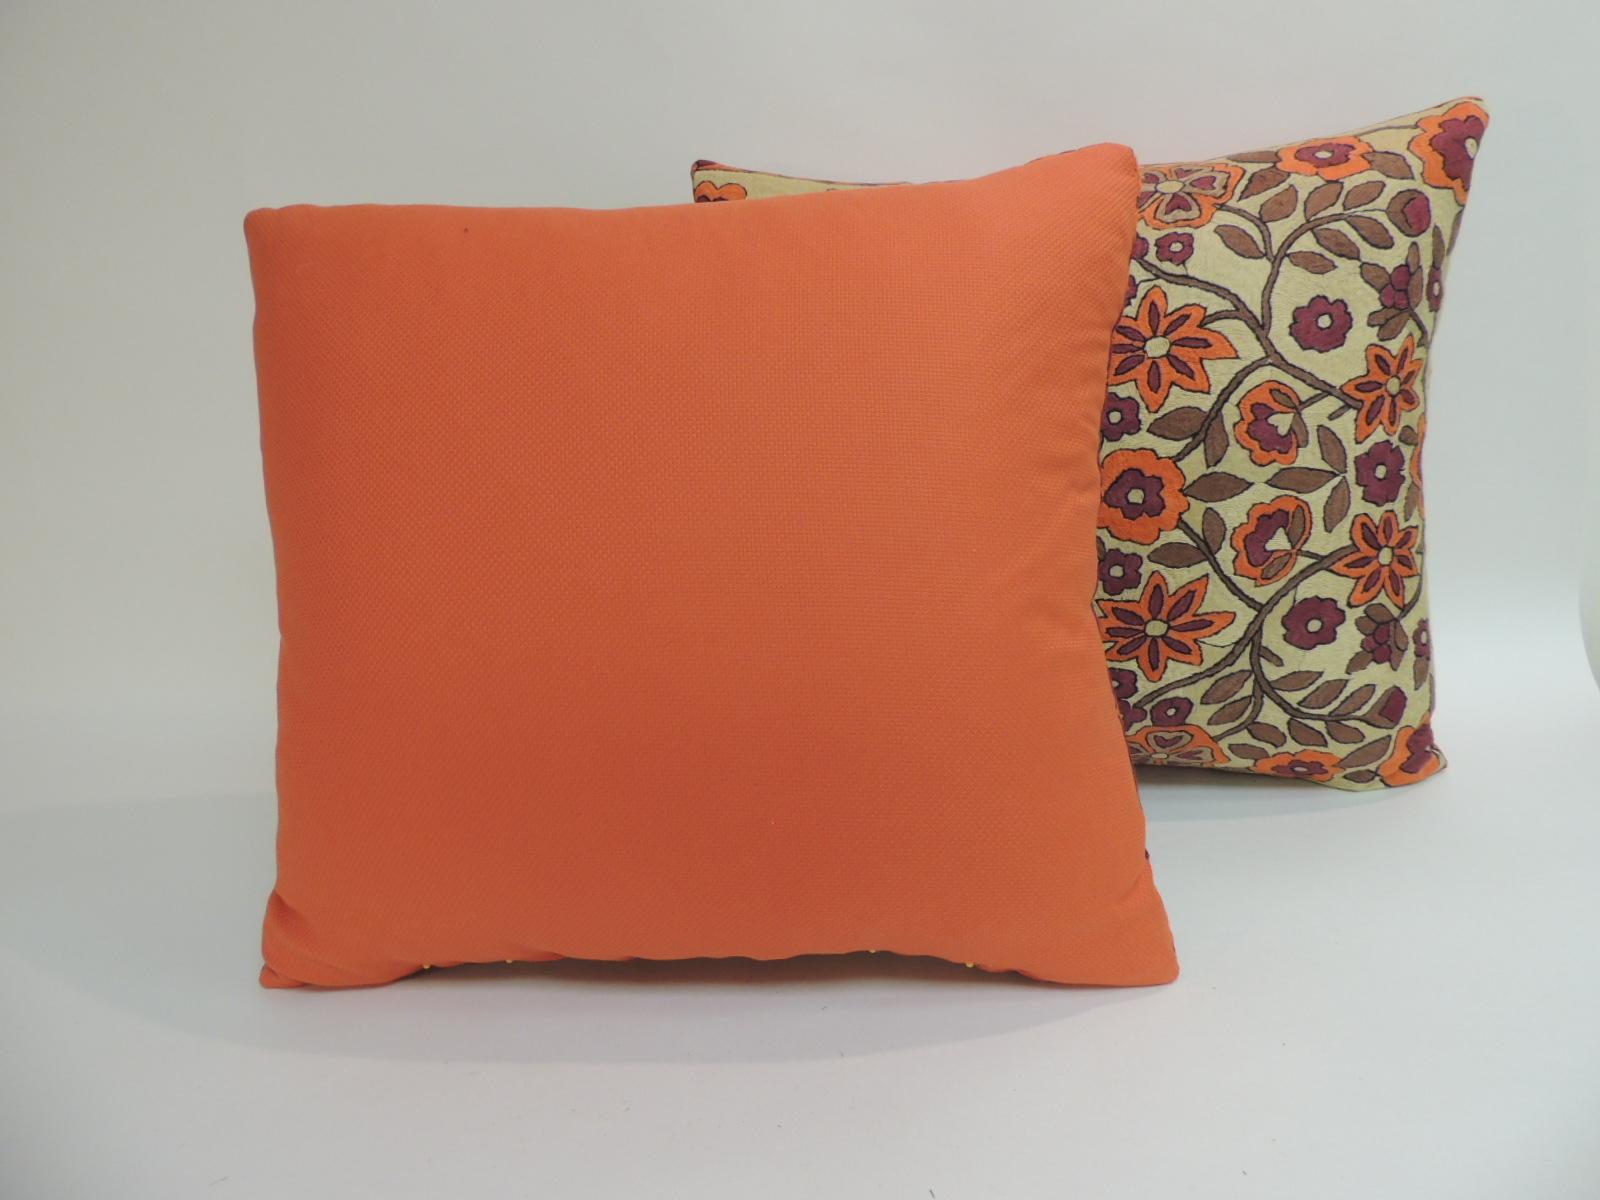 Hand-Crafted Pair of Orange Floral Vintage Suzani Decorative Pillows